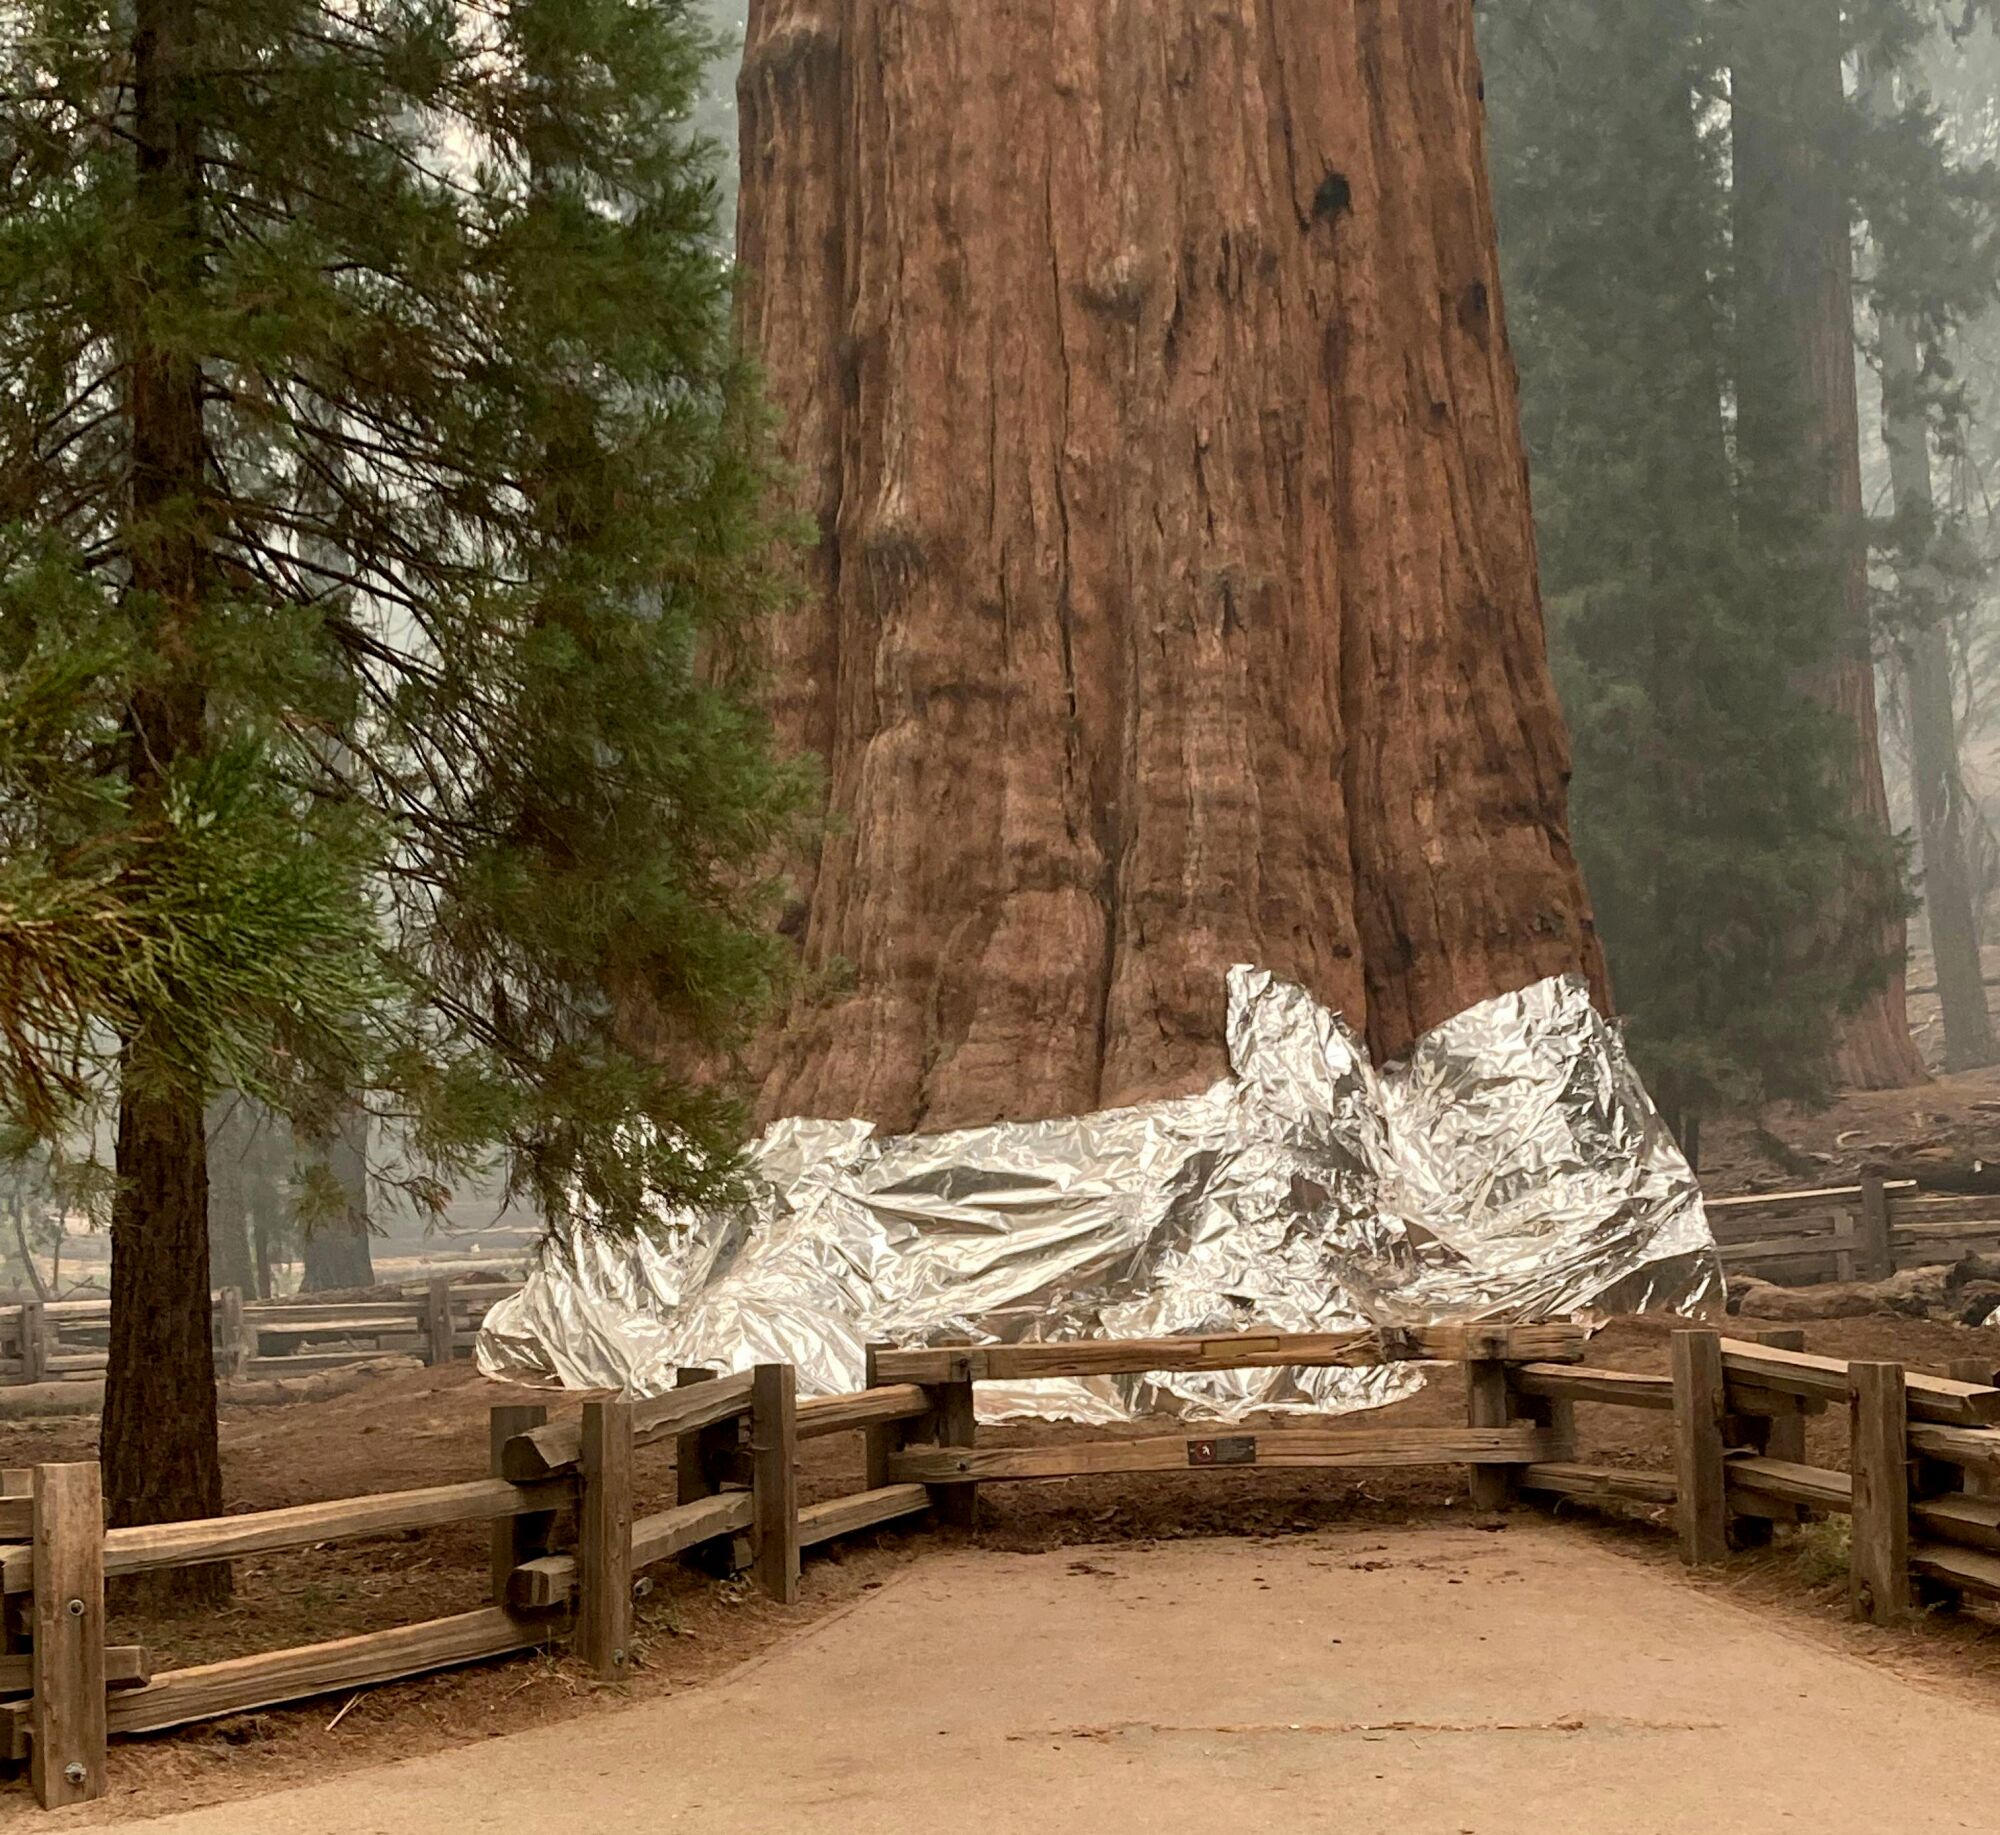 The General Sherman tree's base is wrapped in protective foil.